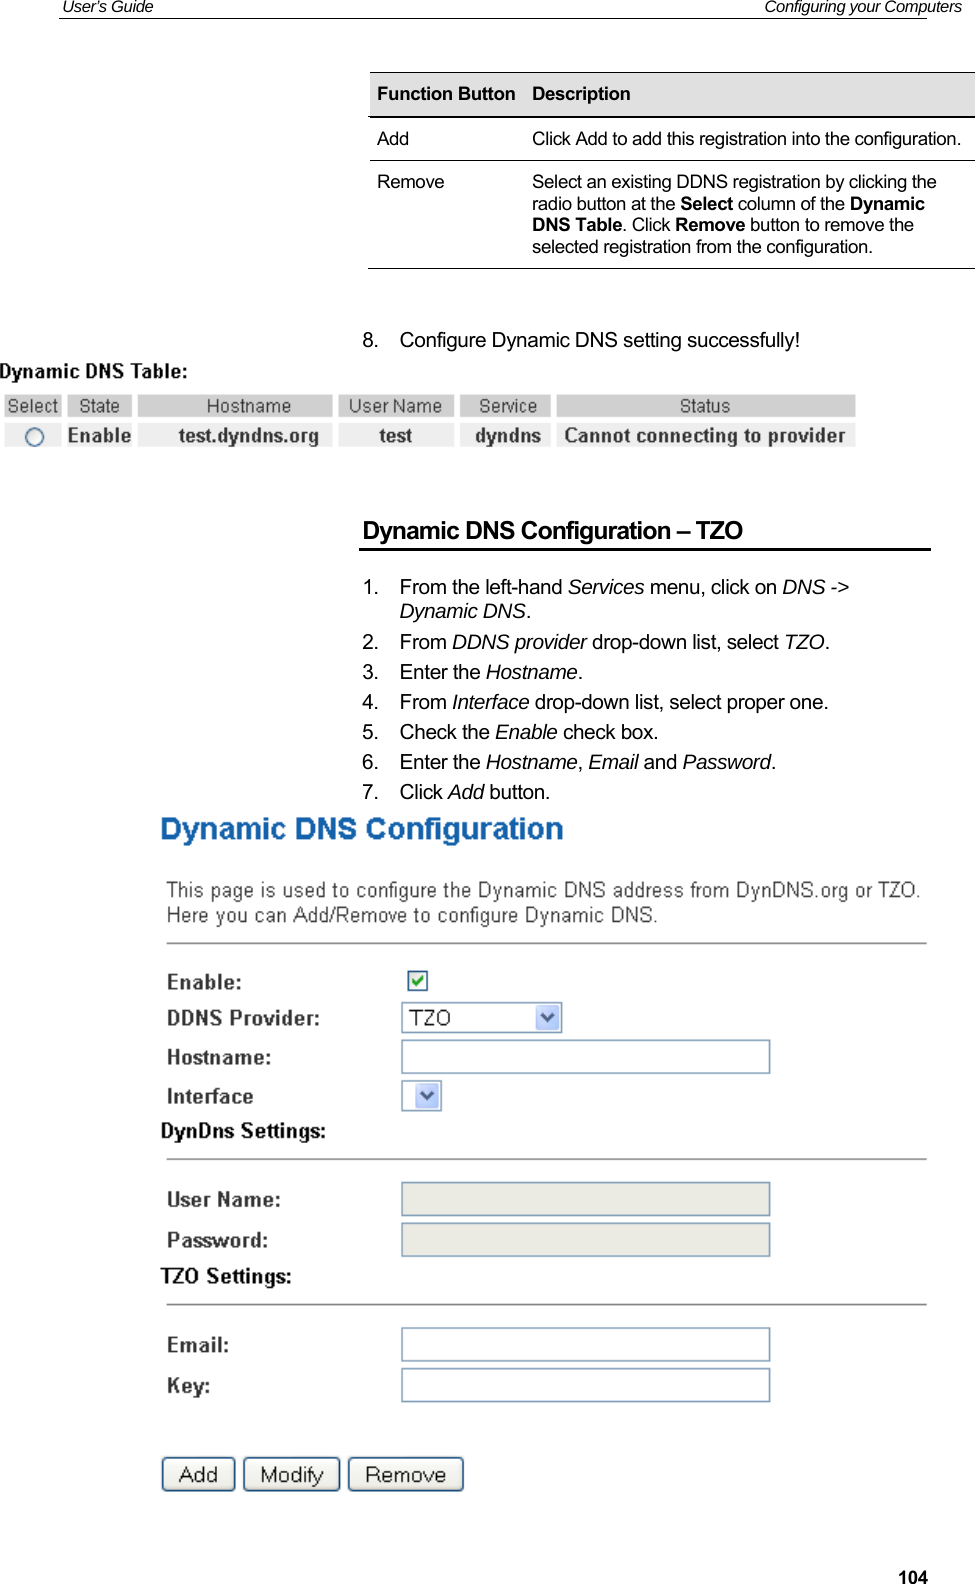 User’s Guide   Configuring your Computers  104       8.  Configure Dynamic DNS setting successfully!   Dynamic DNS Configuration – TZO 1.  From the left-hand Services menu, click on DNS -&gt; Dynamic DNS. 2.  From DDNS provider drop-down list, select TZO. 3.  Enter the Hostname. 4.  From Interface drop-down list, select proper one. 5.  Check the Enable check box. 6.  Enter the Hostname, Email and Password. 7.  Click Add button.  Function Button Description Add  Click Add to add this registration into the configuration.Remove  Select an existing DDNS registration by clicking the radio button at the Select column of the Dynamic DNS Table. Click Remove button to remove the selected registration from the configuration. 